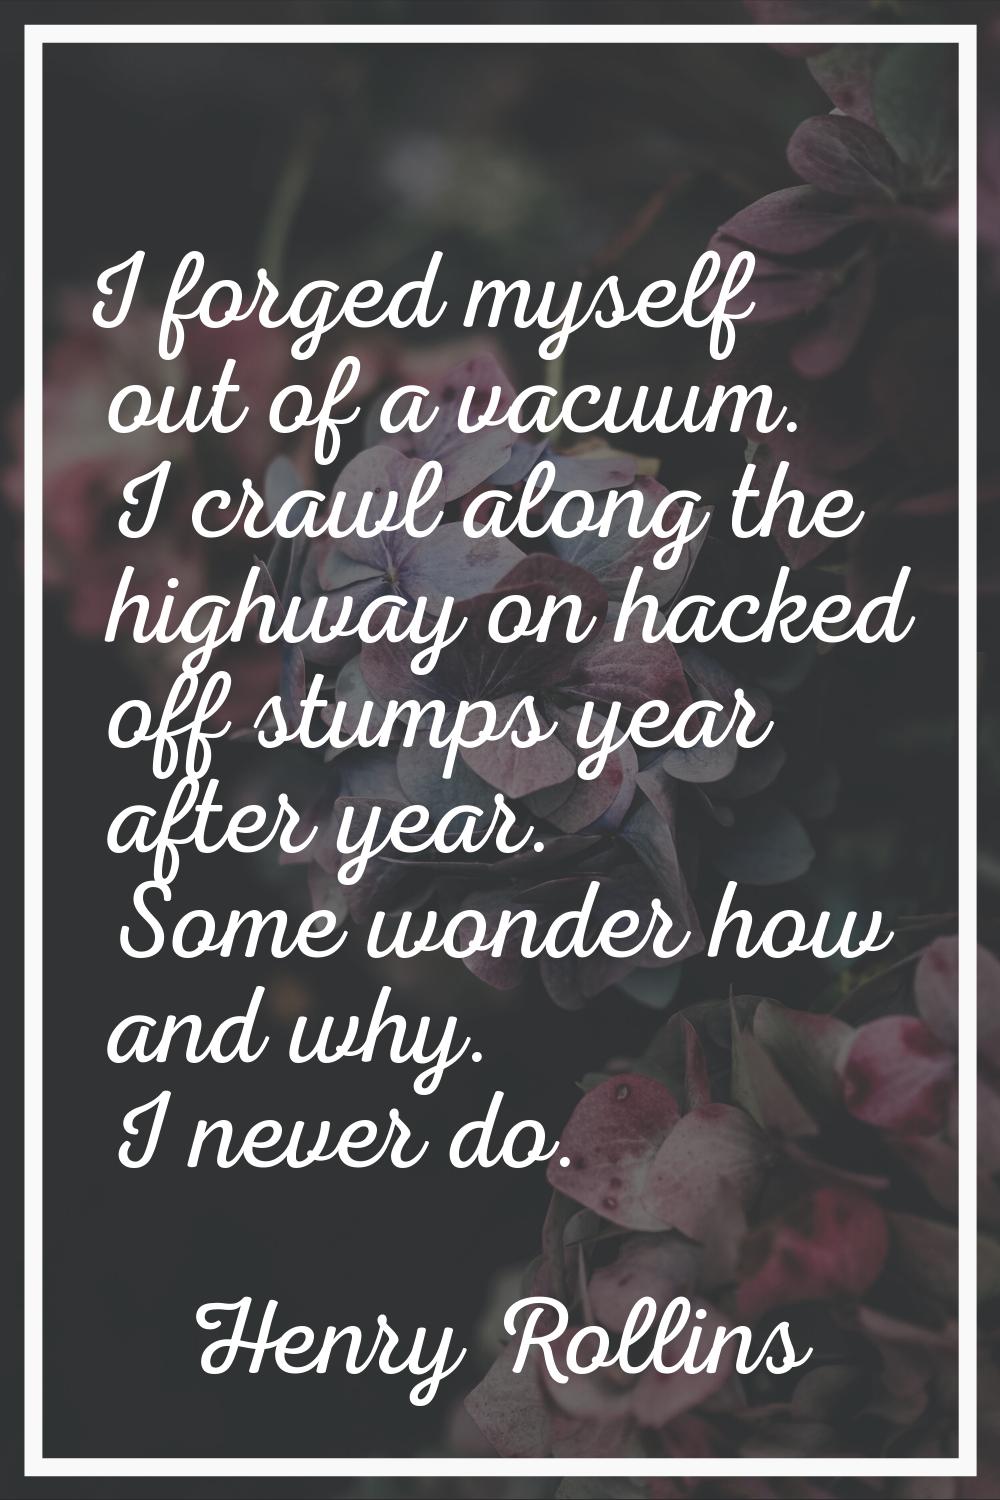 I forged myself out of a vacuum. I crawl along the highway on hacked off stumps year after year. So